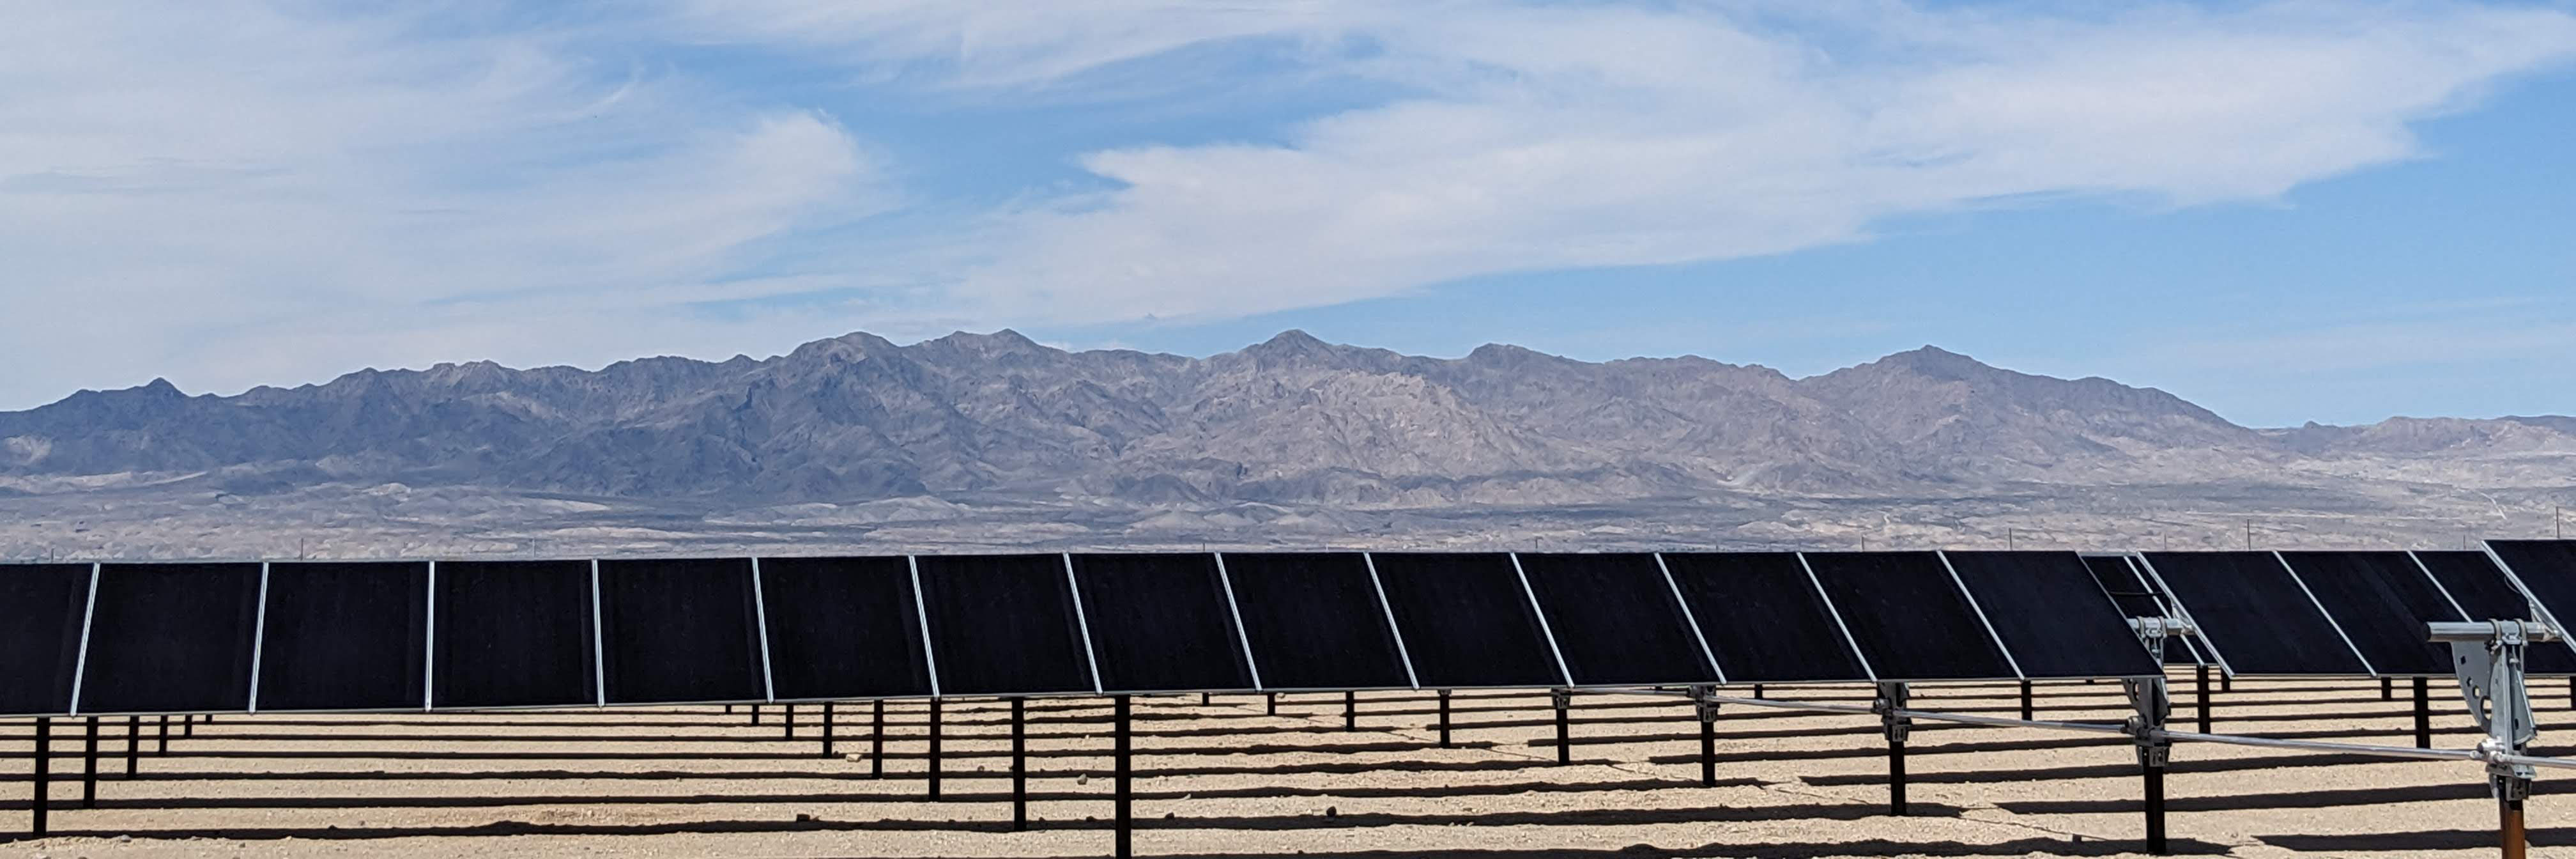 Mohave Solar Energy Array Image